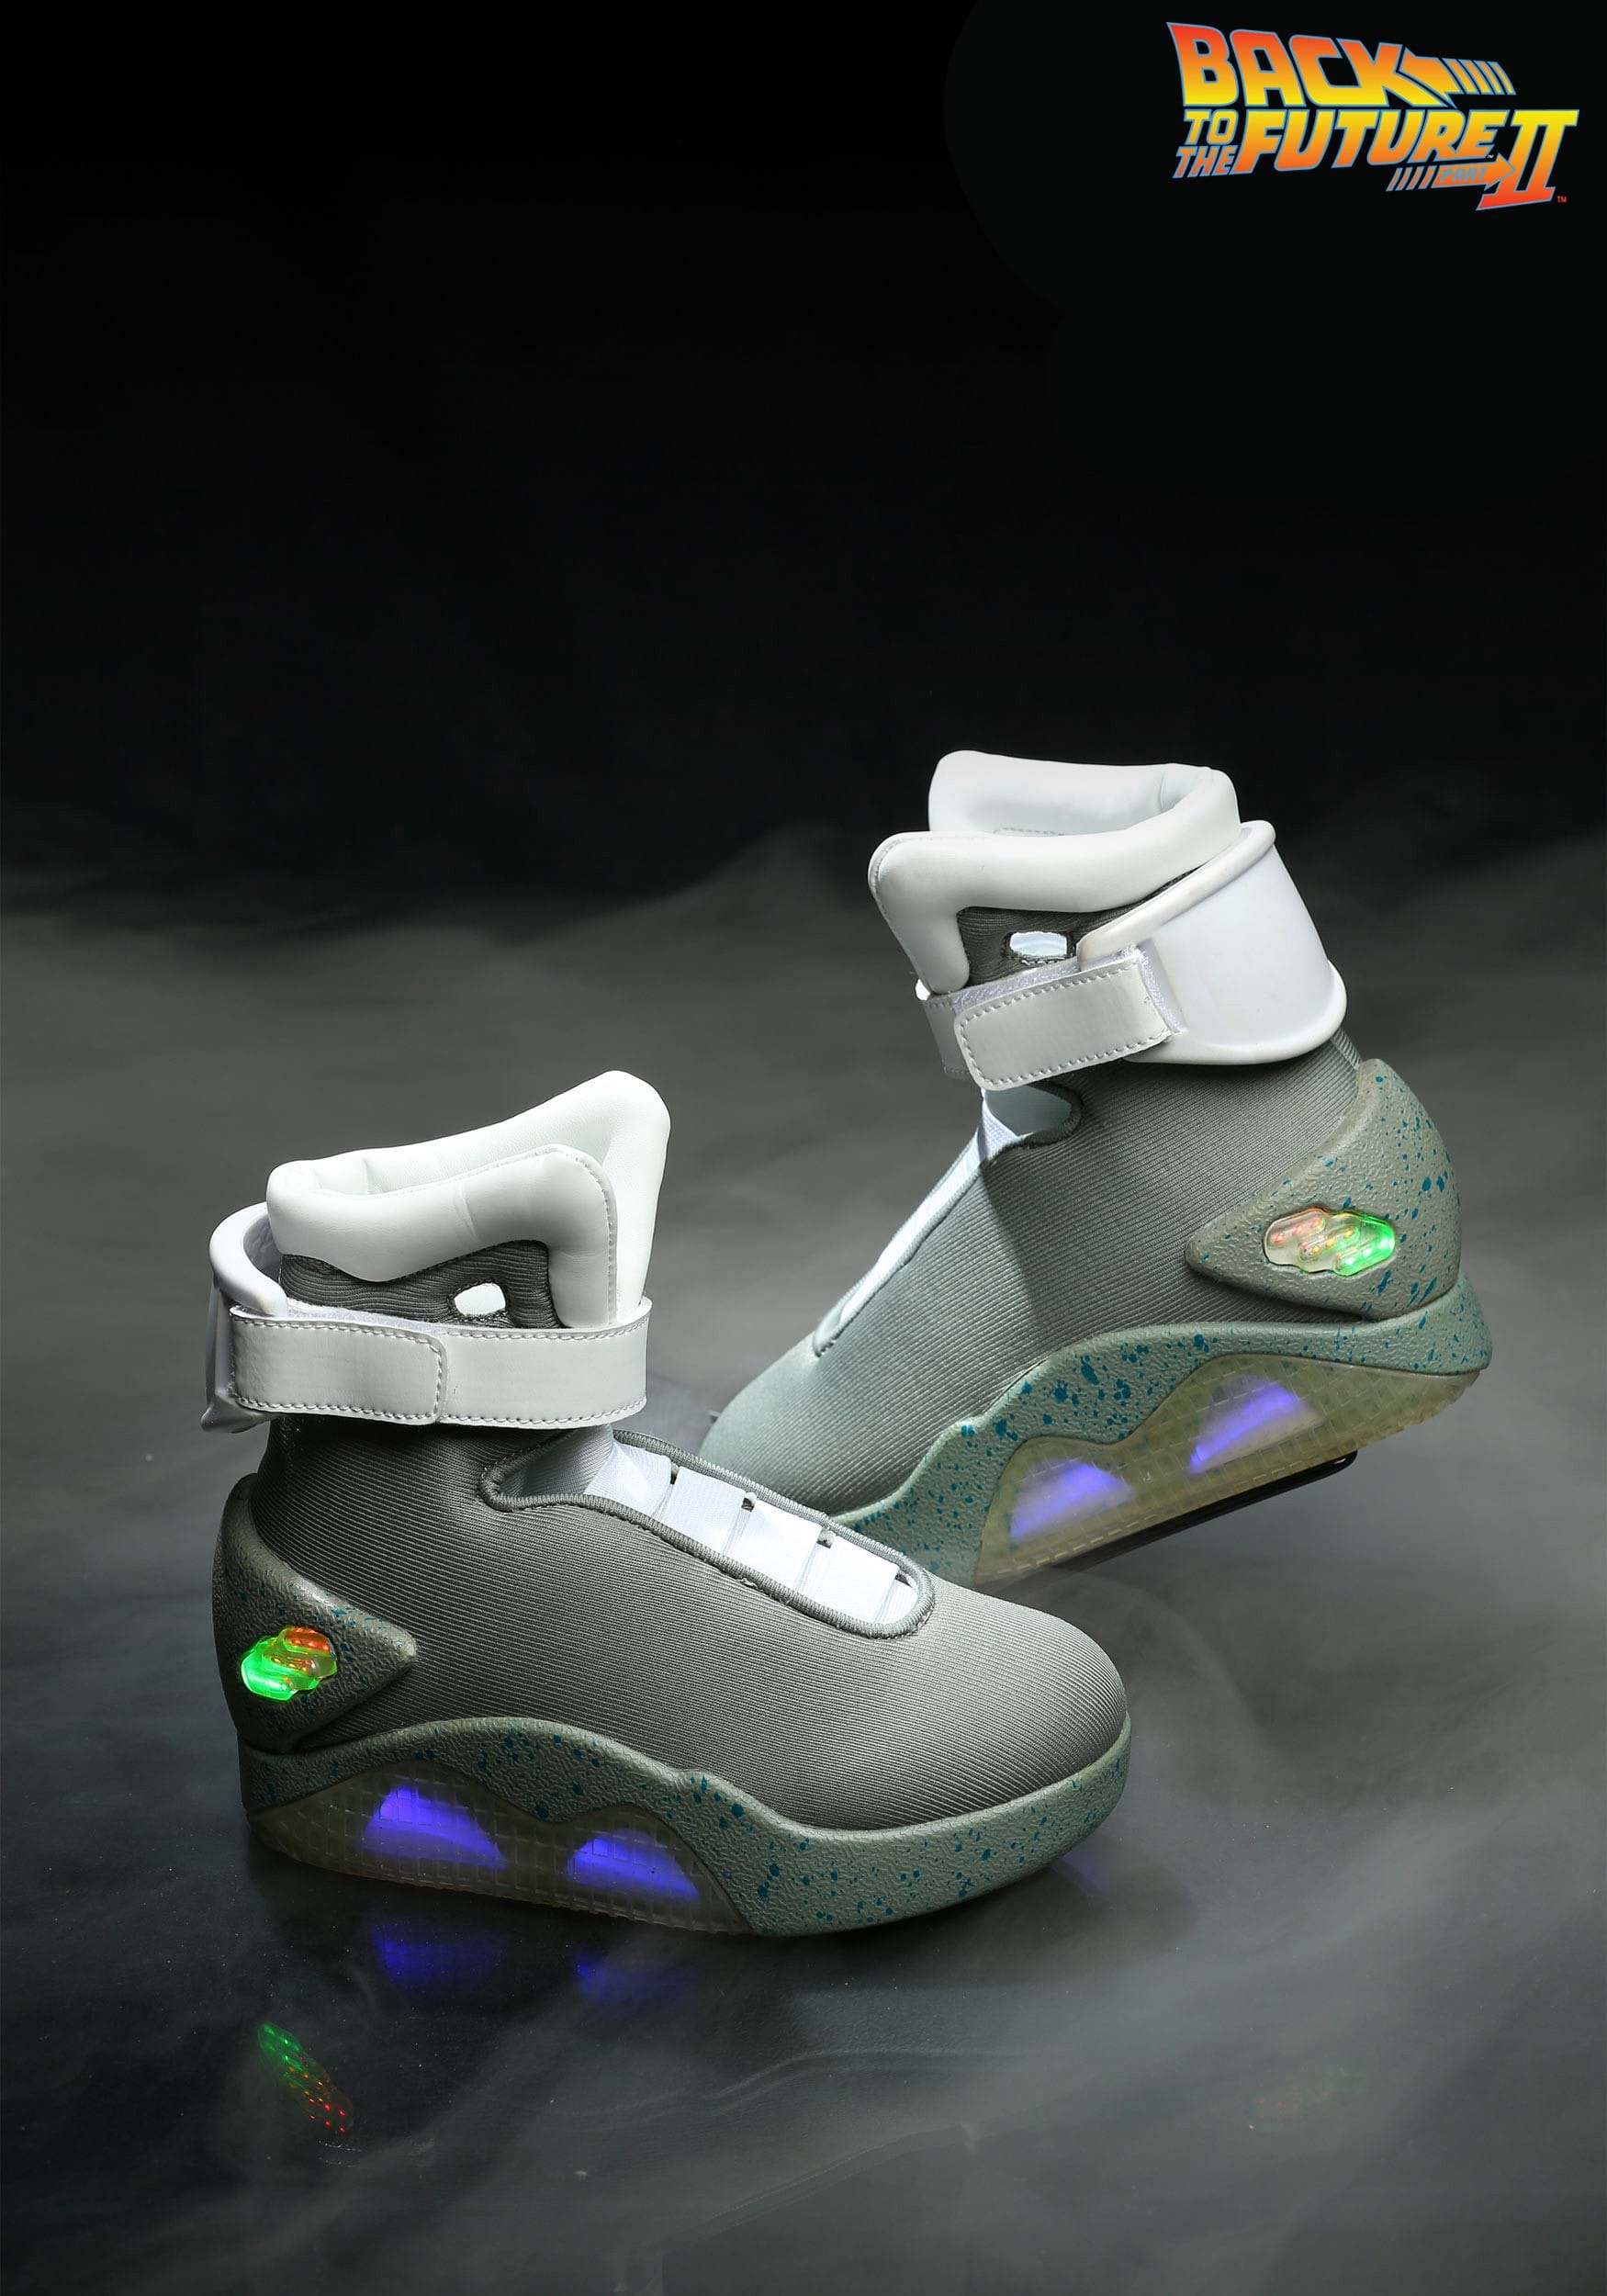 back to the future sneakers